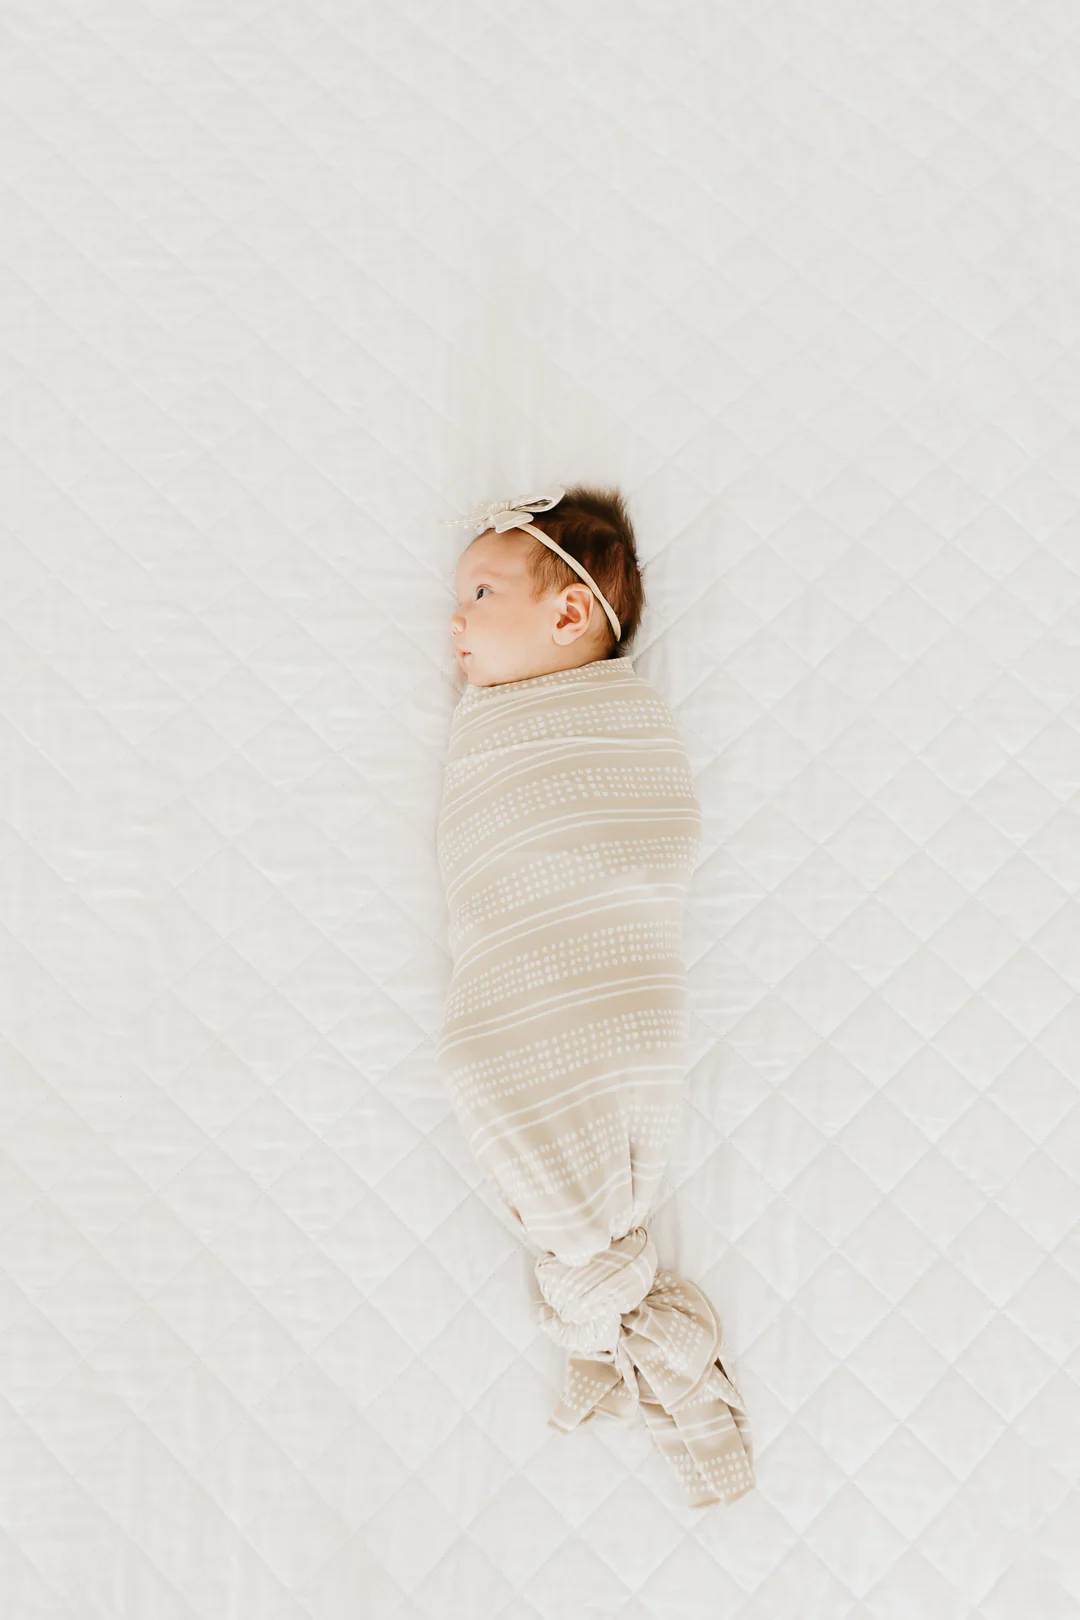 Clay Knit Swaddle Blanket